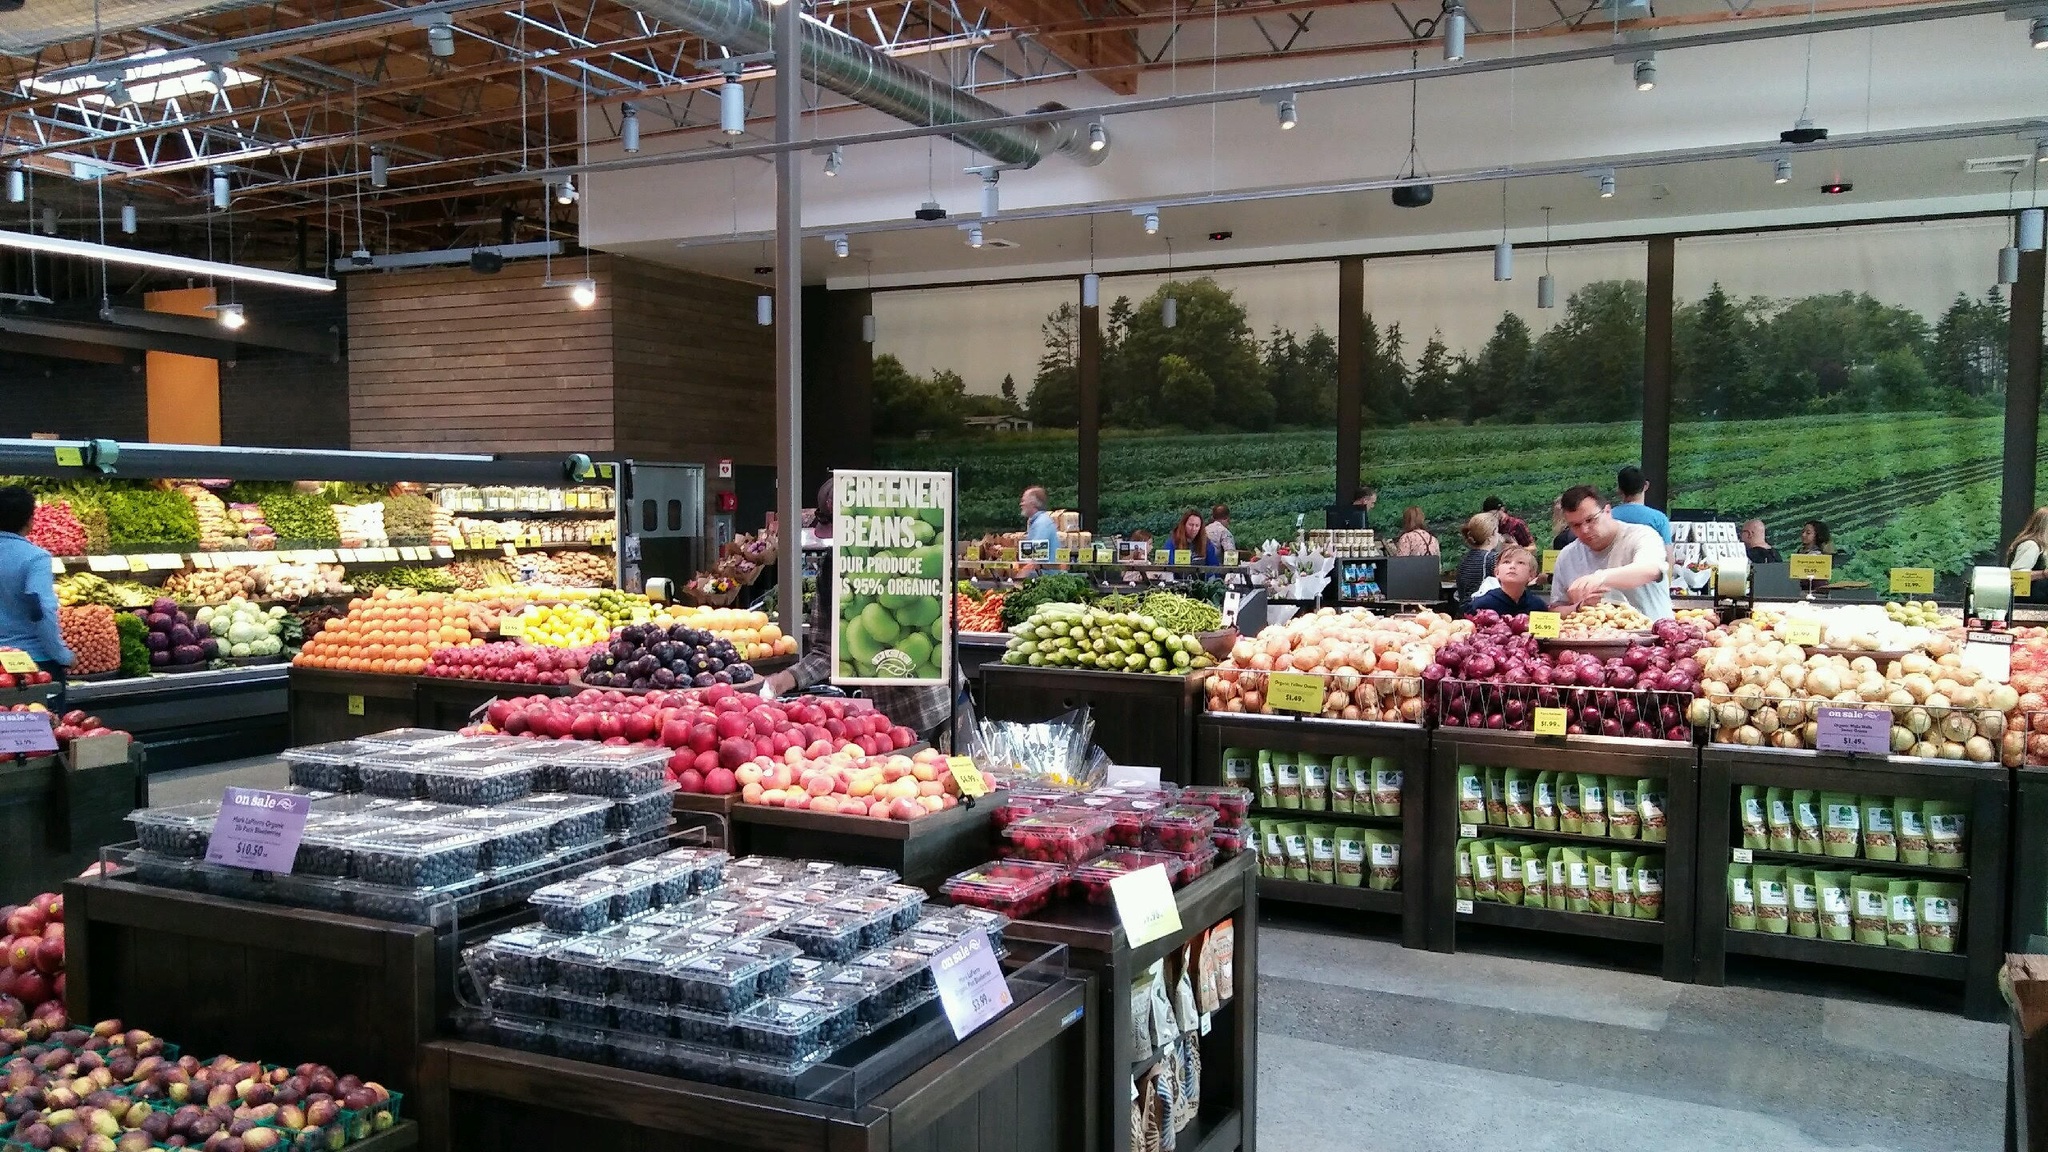 PCC Natural Markets location in Bothell. Aaron Kunkler/Bothell Reporter